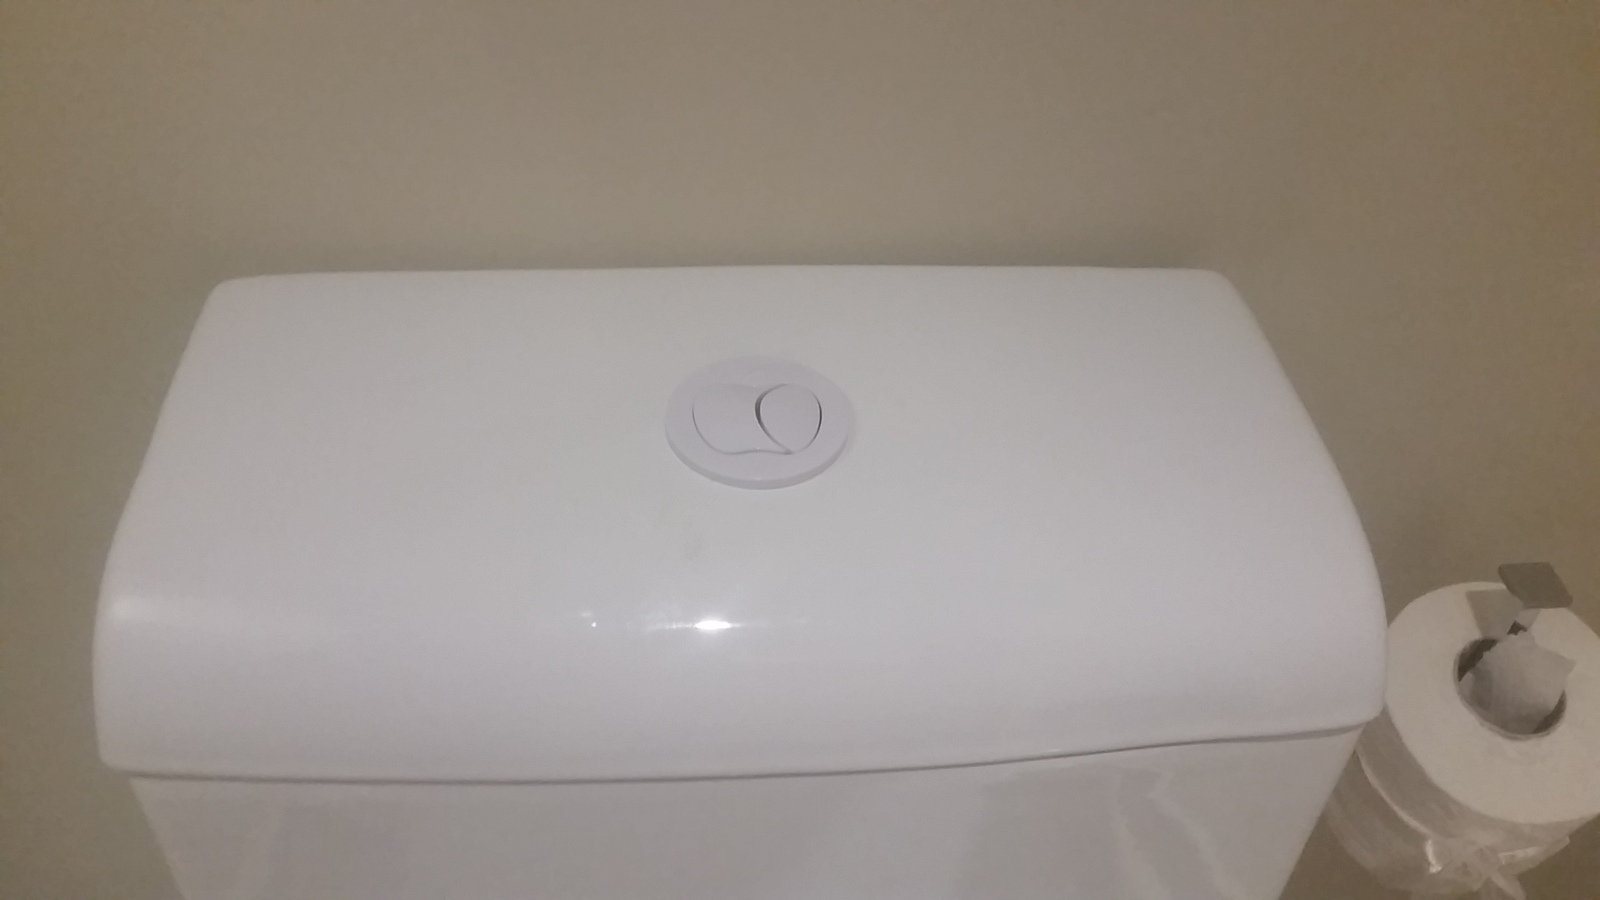 The best use of the Apple logo. - My, Apple, Toilet